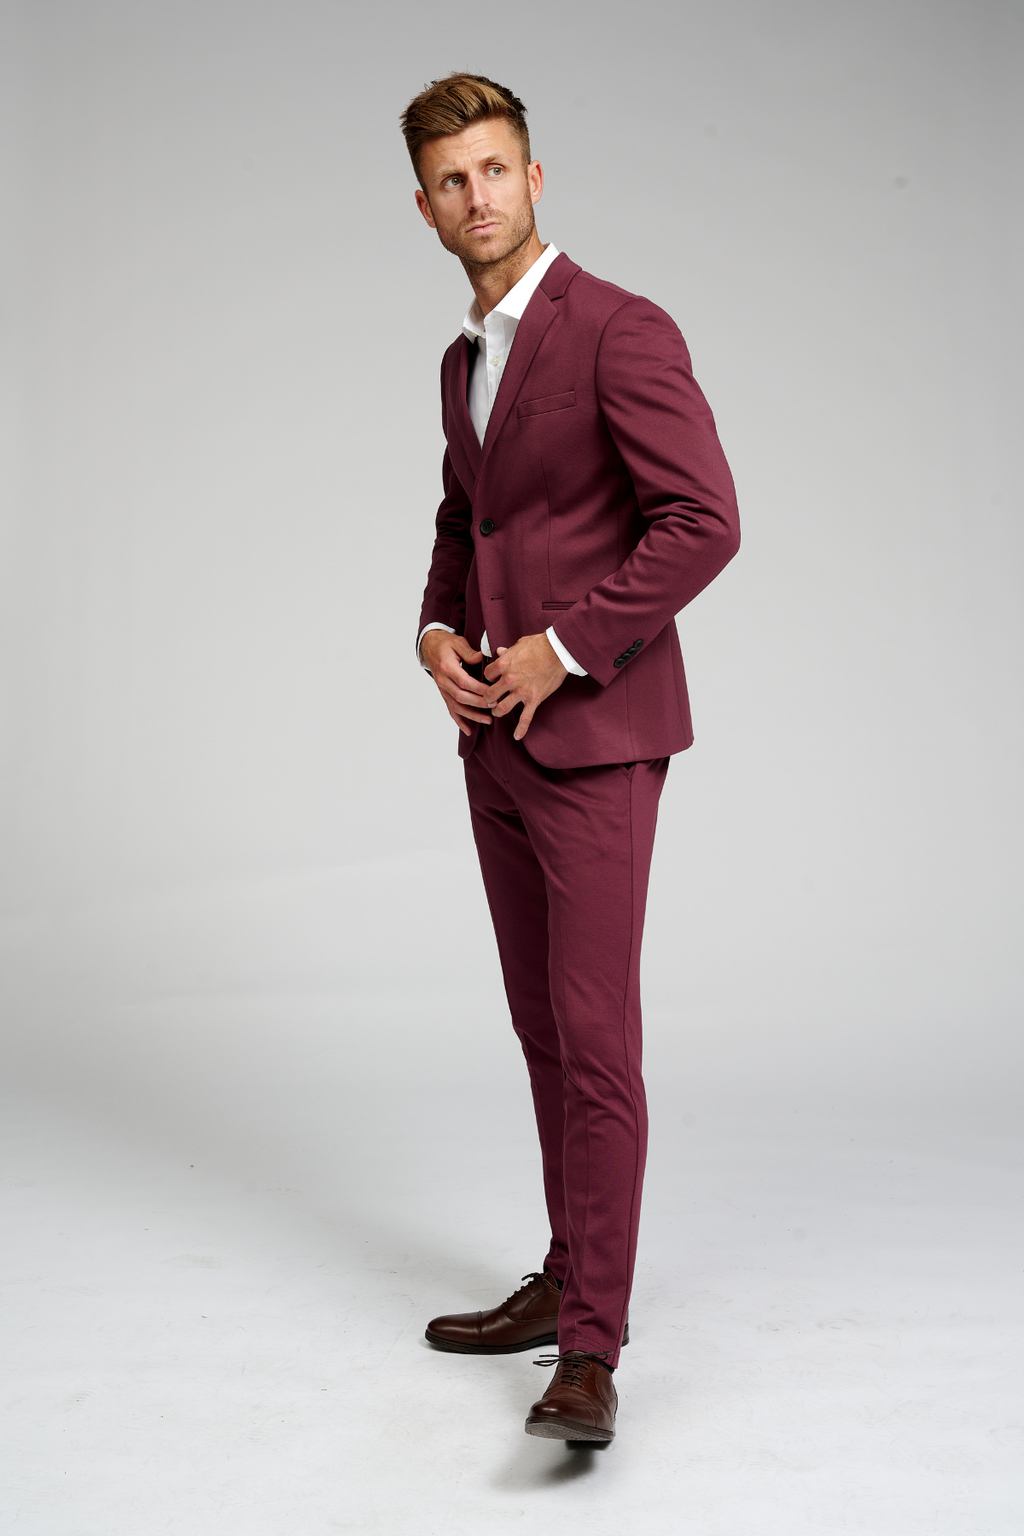 The Original Performance Suit (Burgundy) - Package Deal